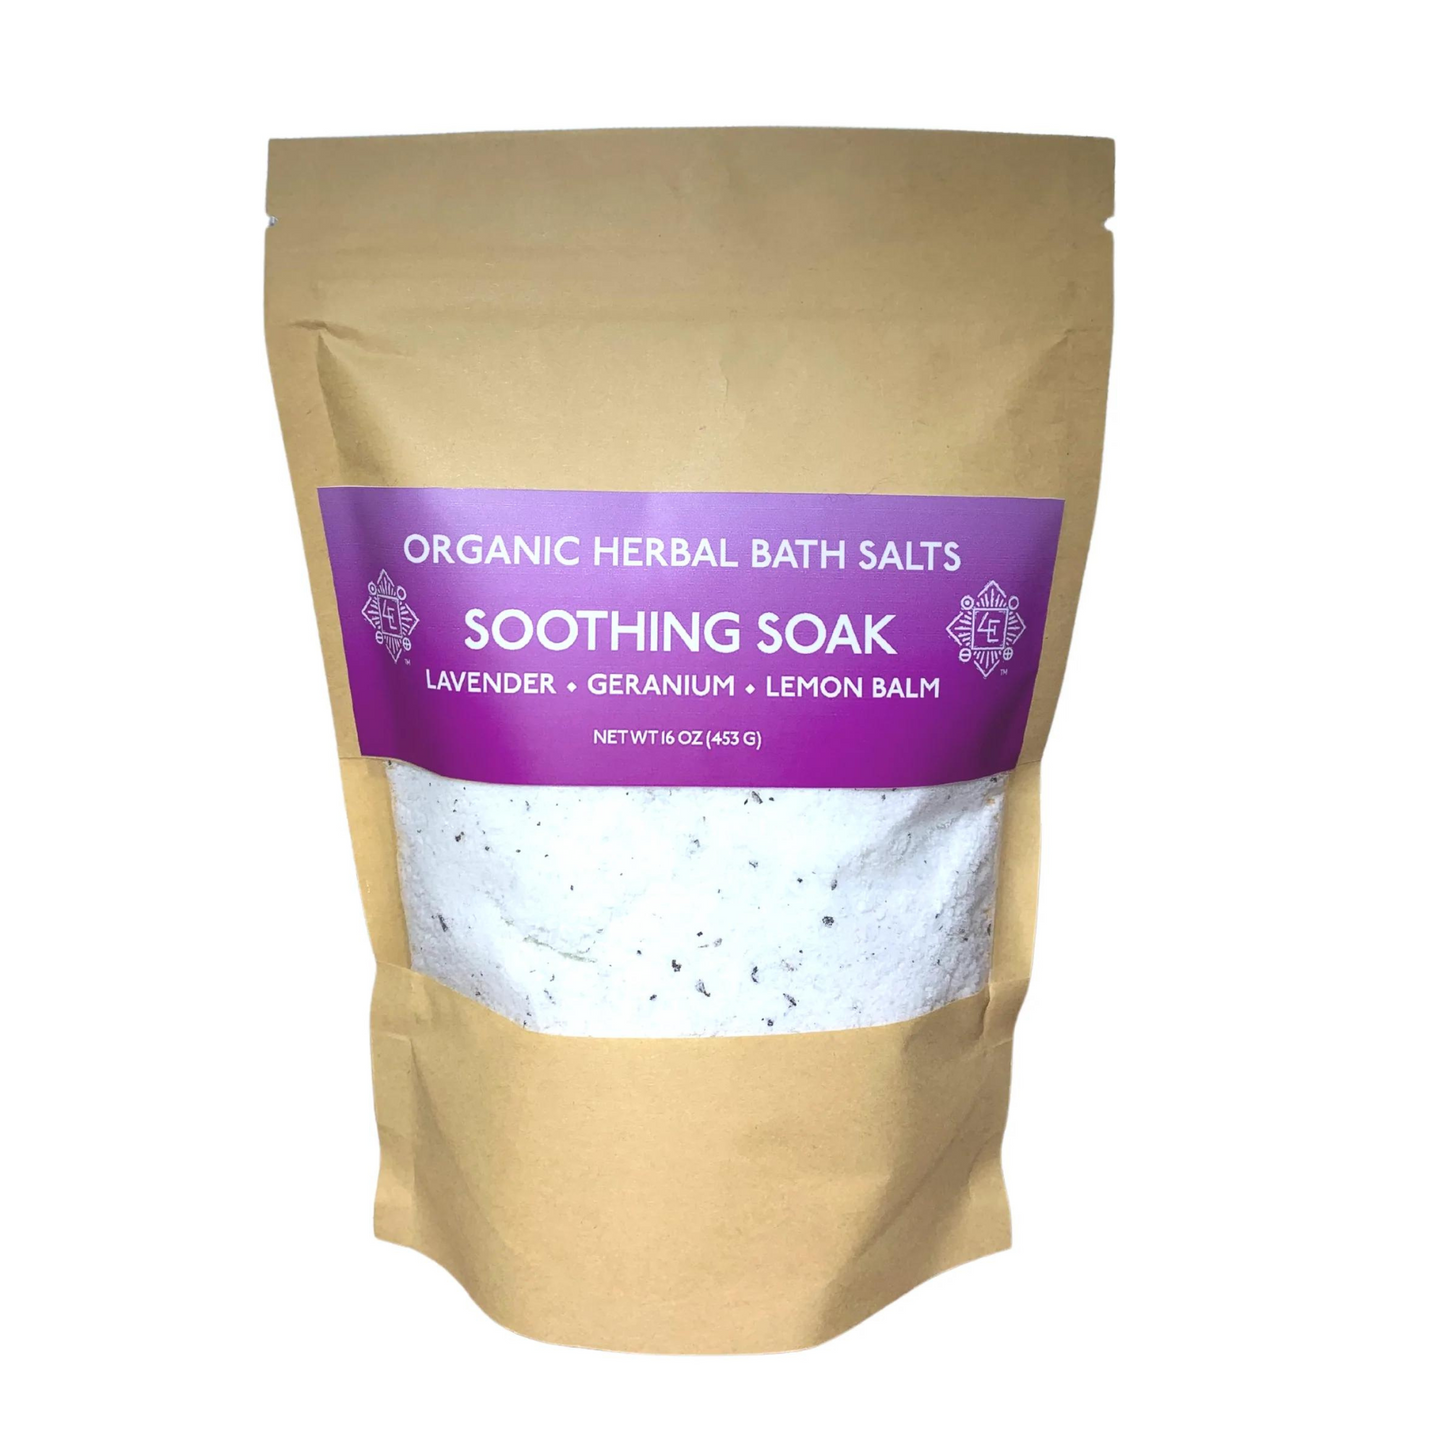 Primary Image of Four Elements Soothing Soak Bath Salts (16 oz)